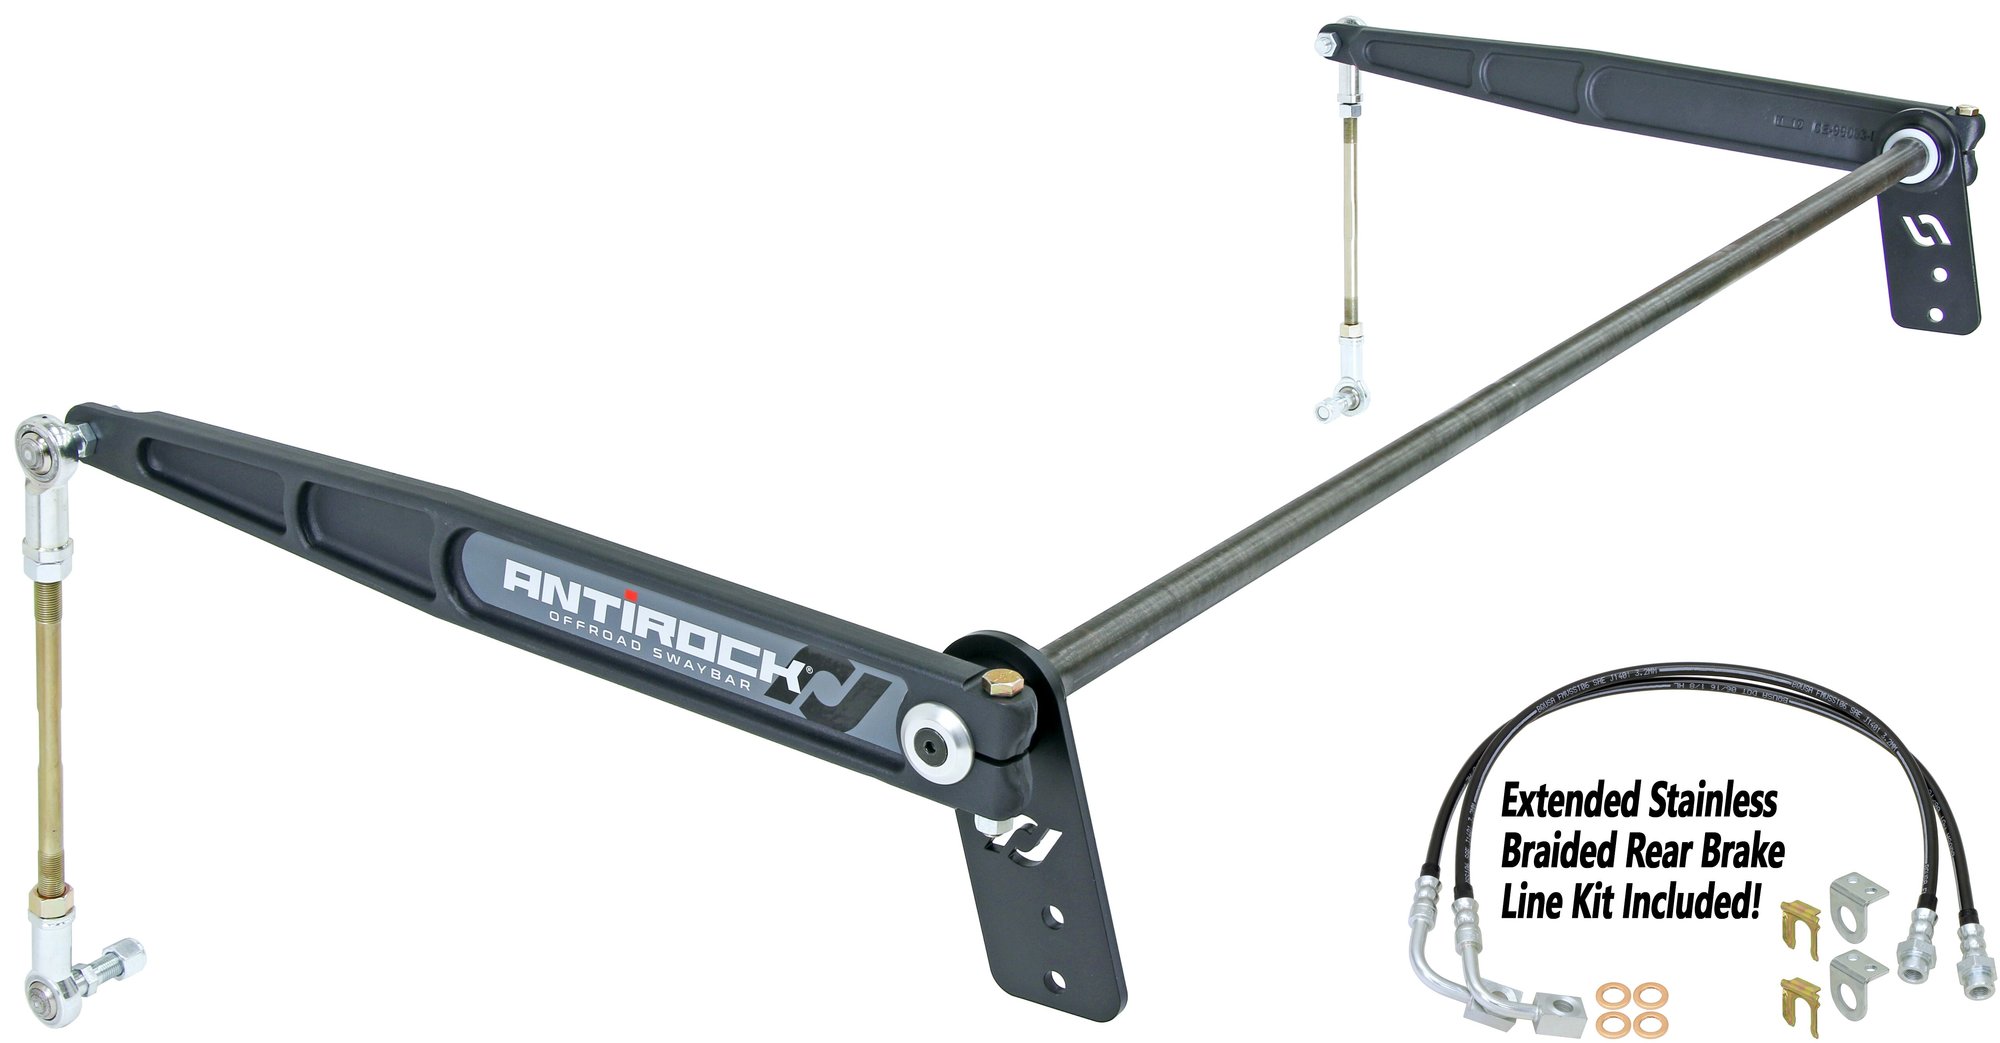 RockJock CE-9900JKR4 Rear Anti-Rock Sway Bar Kit with Forged Arms for 07-18 Jeep  Wrangler Unlimited JK 4 Door | Quadratec